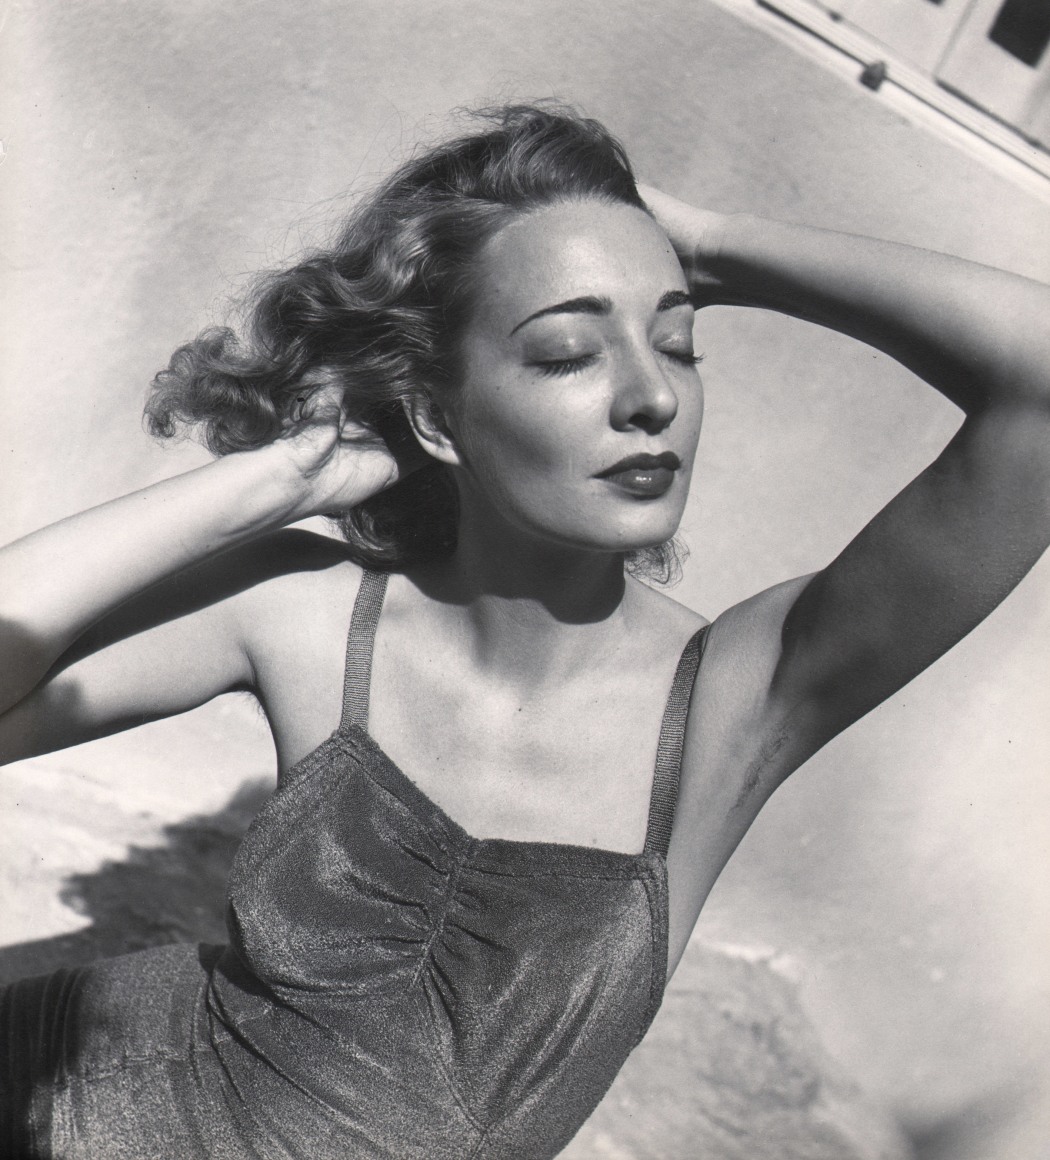 23. Louise Dahl-Wolfe, Untitled, c. 1940. A woman in a swimsuit with both hands in her hair. Her face is tilted towards the upper right of the frame with eyes closed.